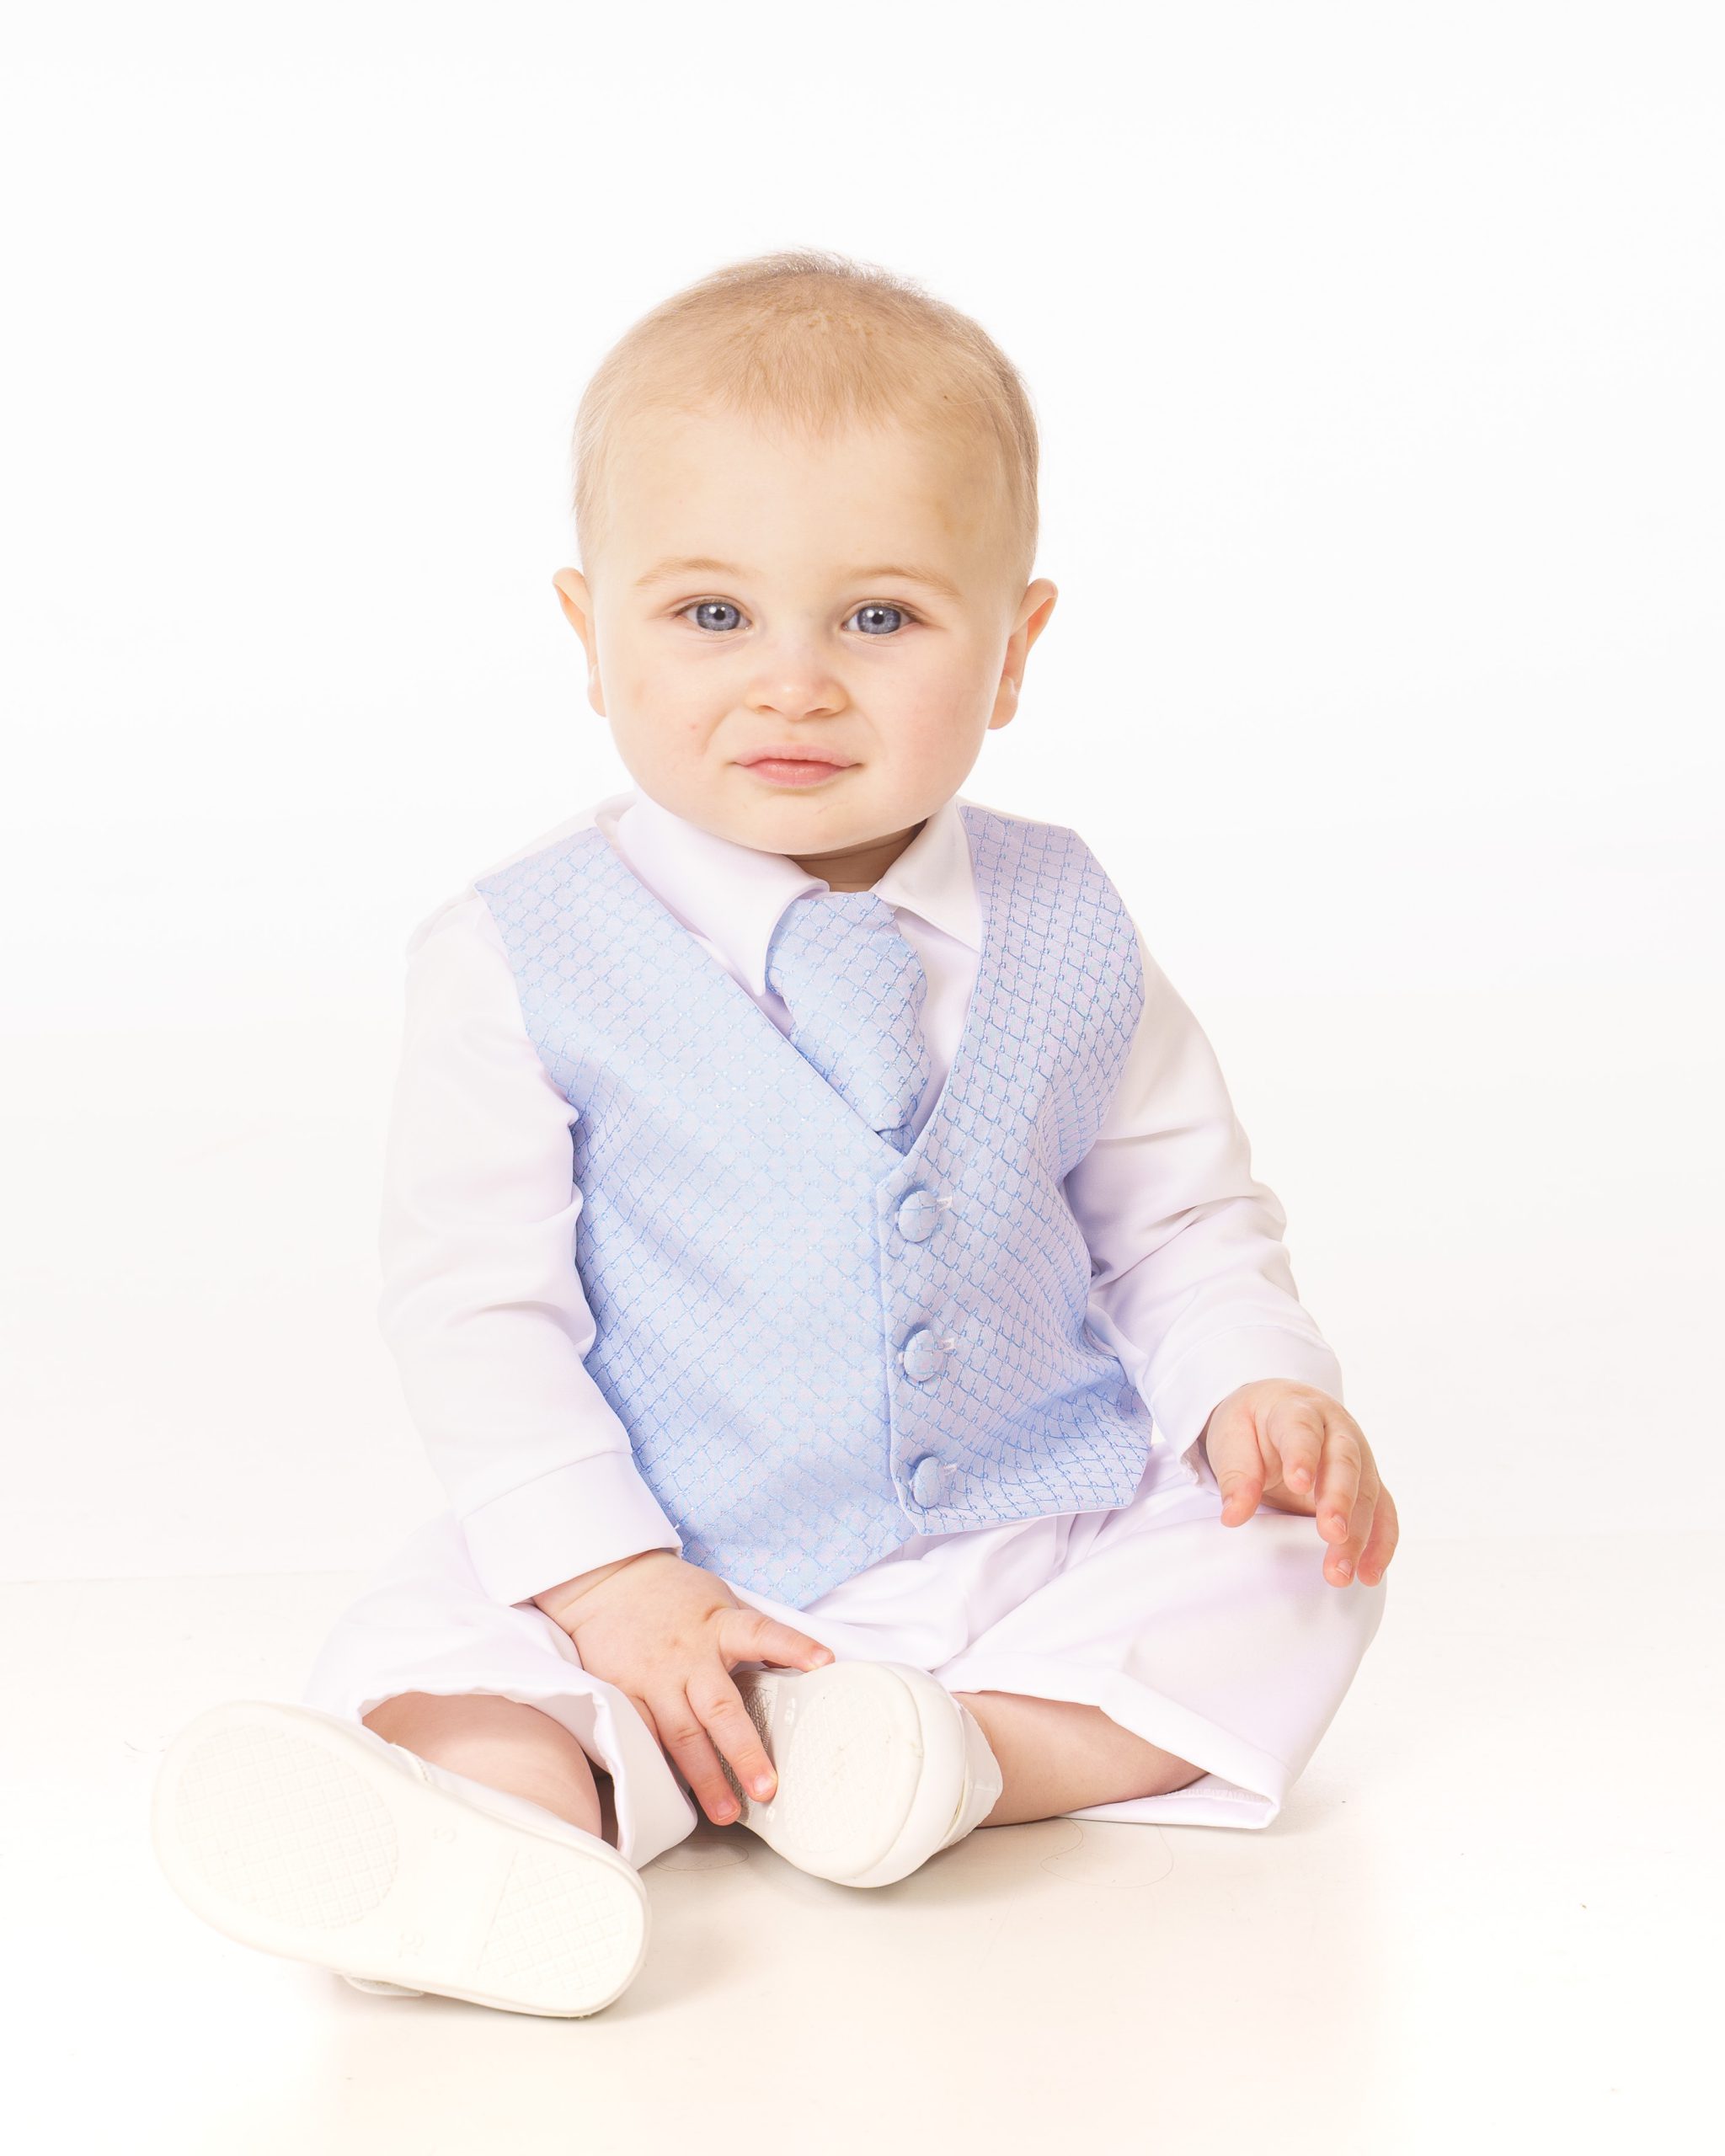 4 Piece Christening Suit in Blue new – Occasionwear for Kids